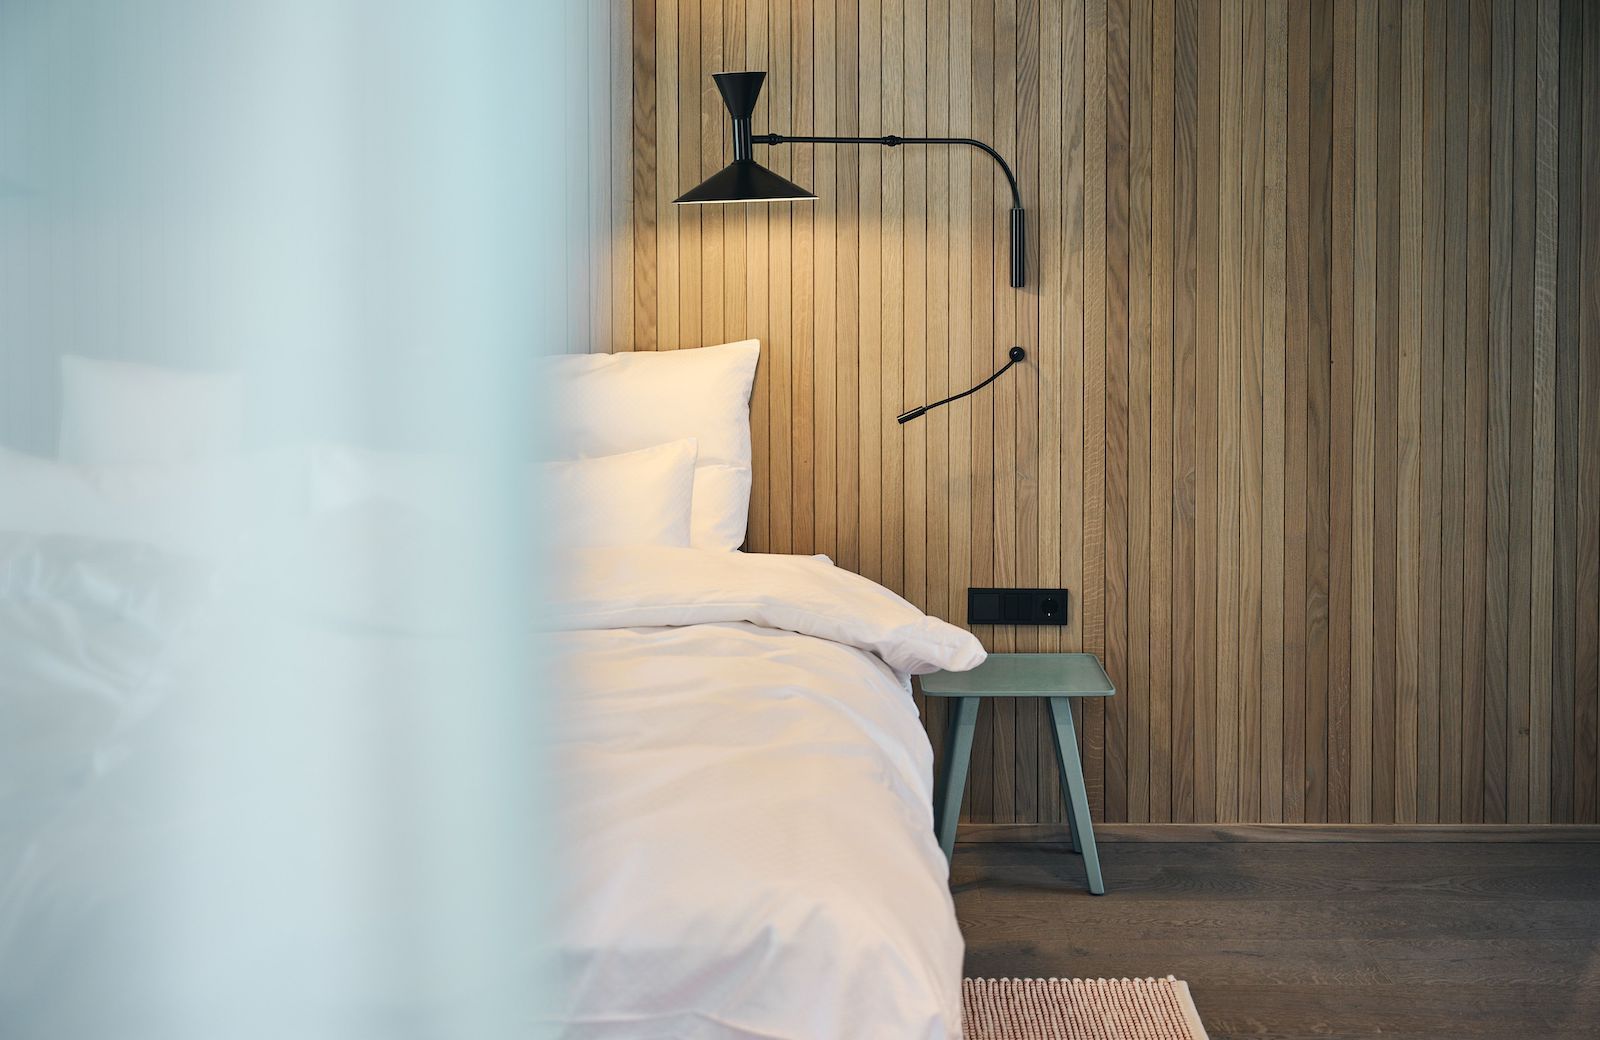 Ullrhaus | new design hotel located in the resort of St Anton in the Tyrolean Alps